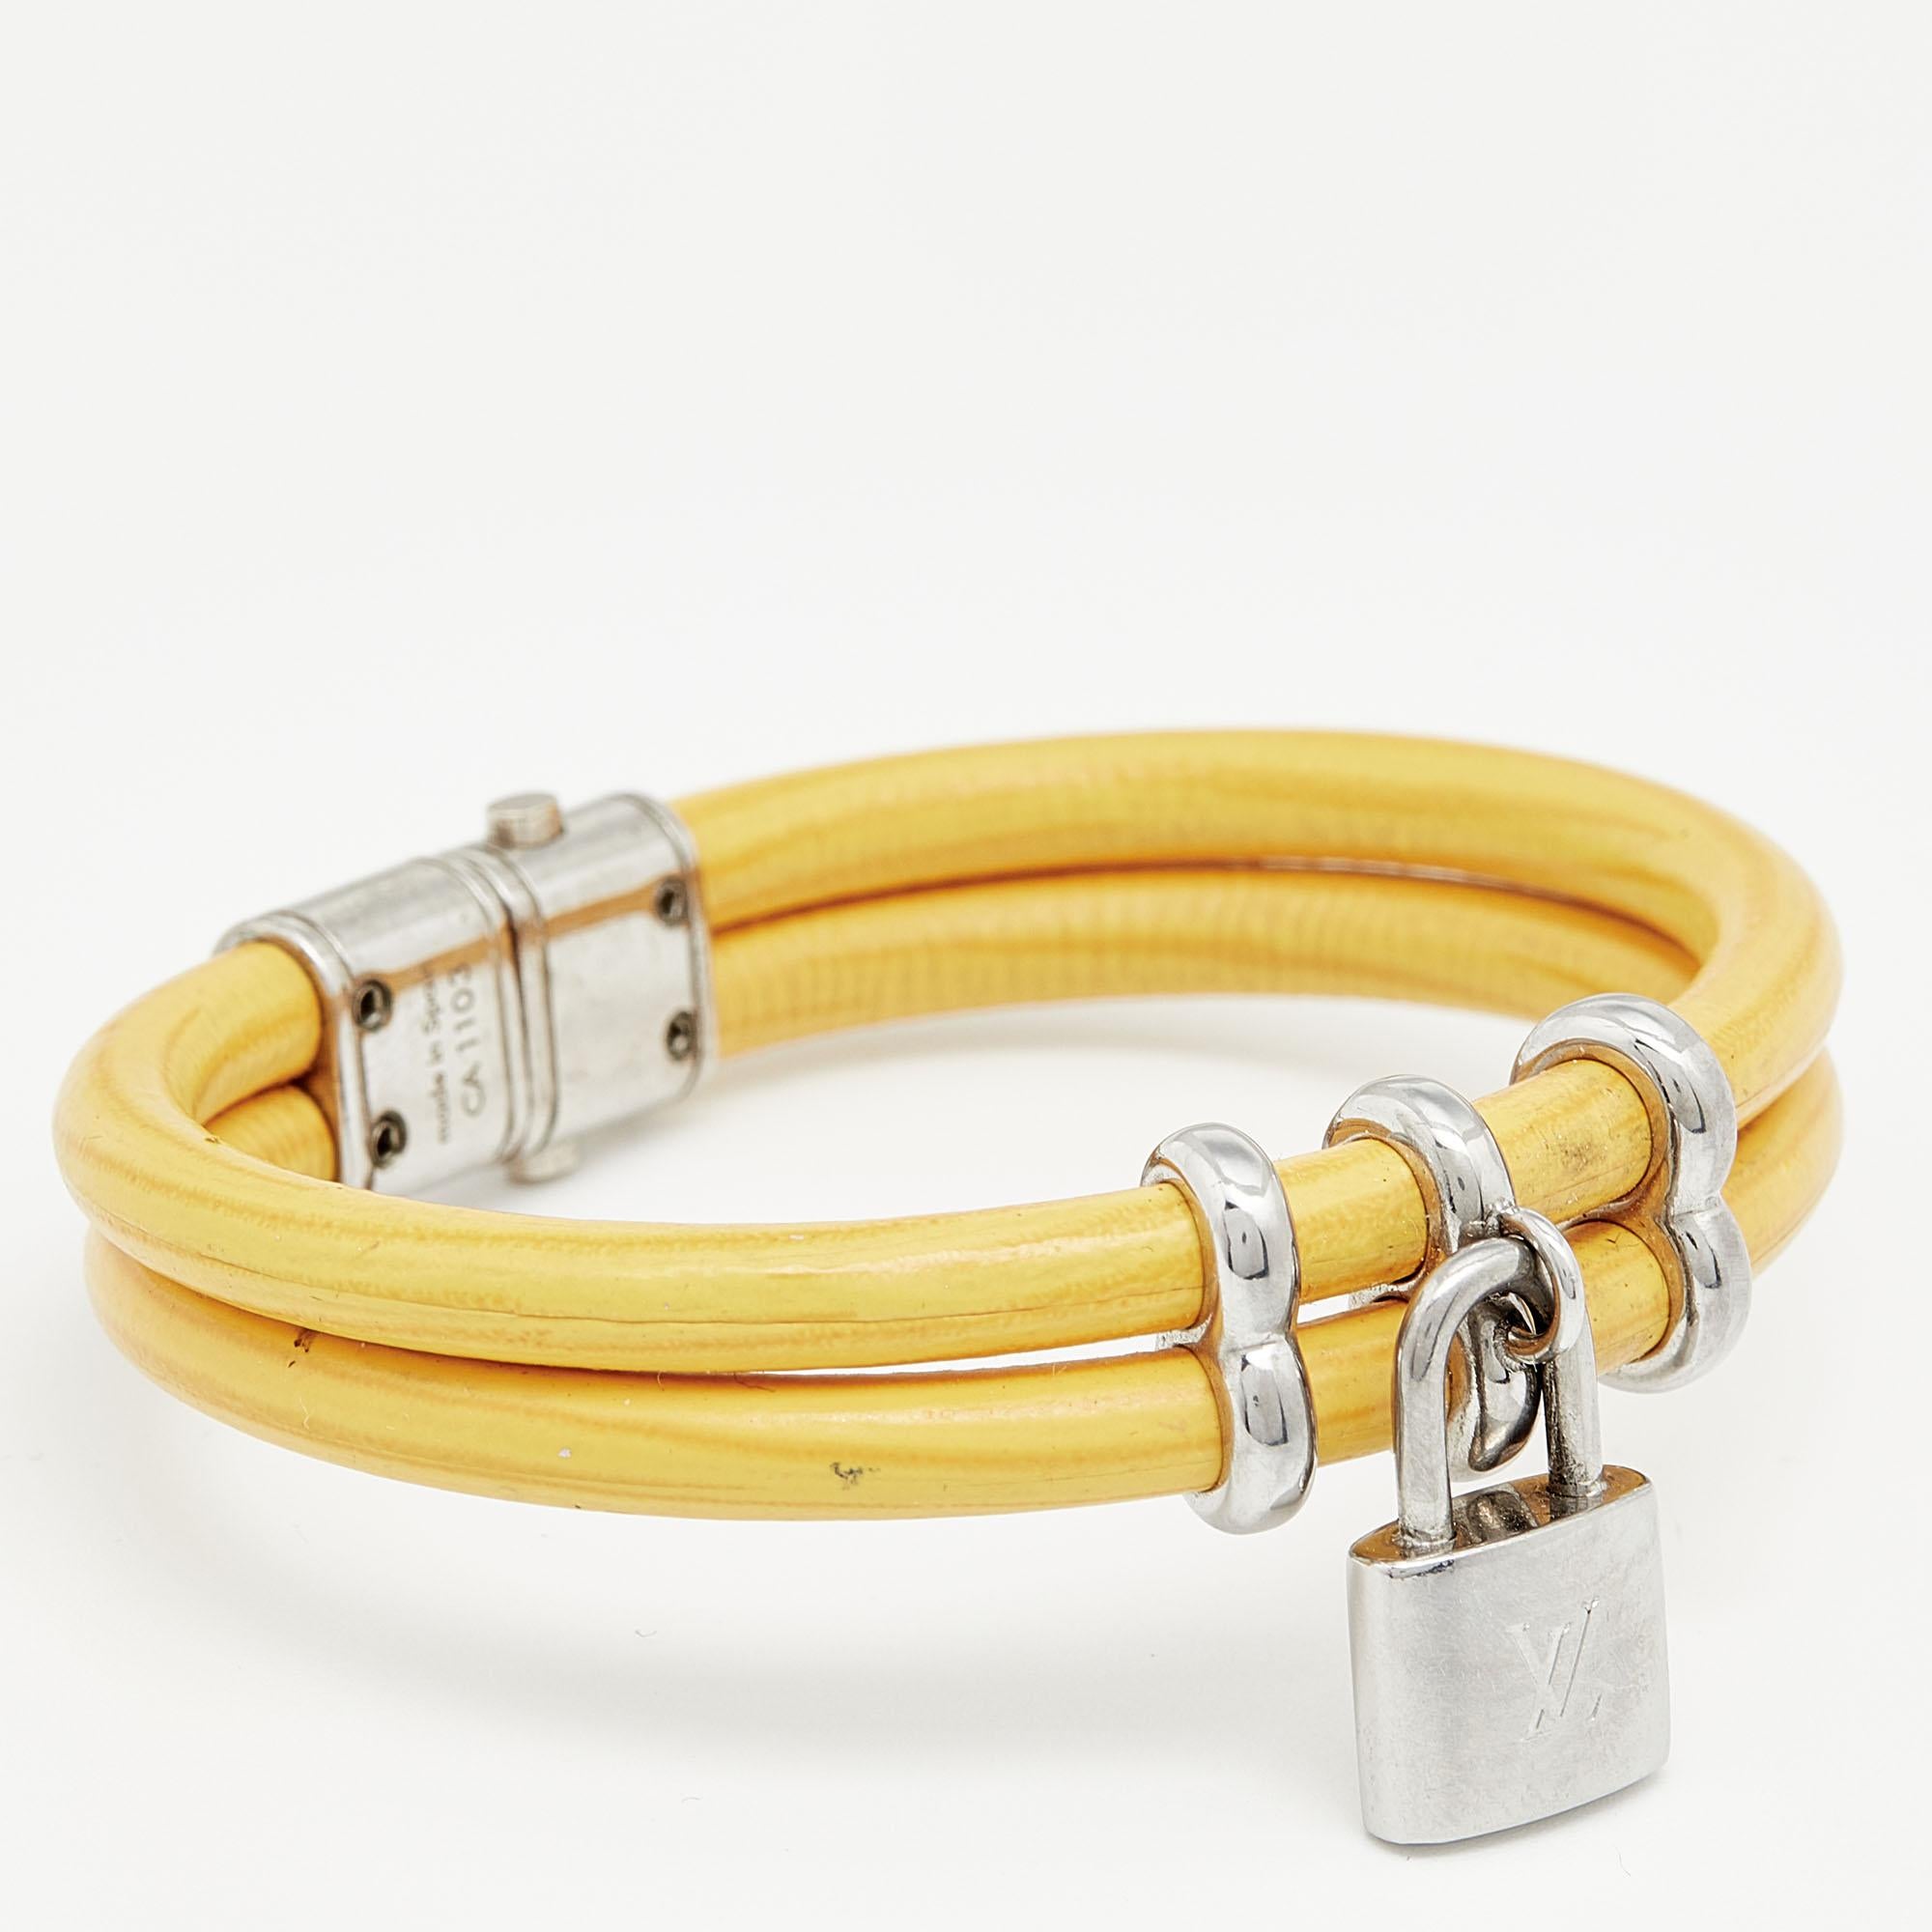 Products by Louis Vuitton: Keep it Twice Monogram Bracelet  Louis vuitton  jewelry, Louis vuitton bracelet, Accessories